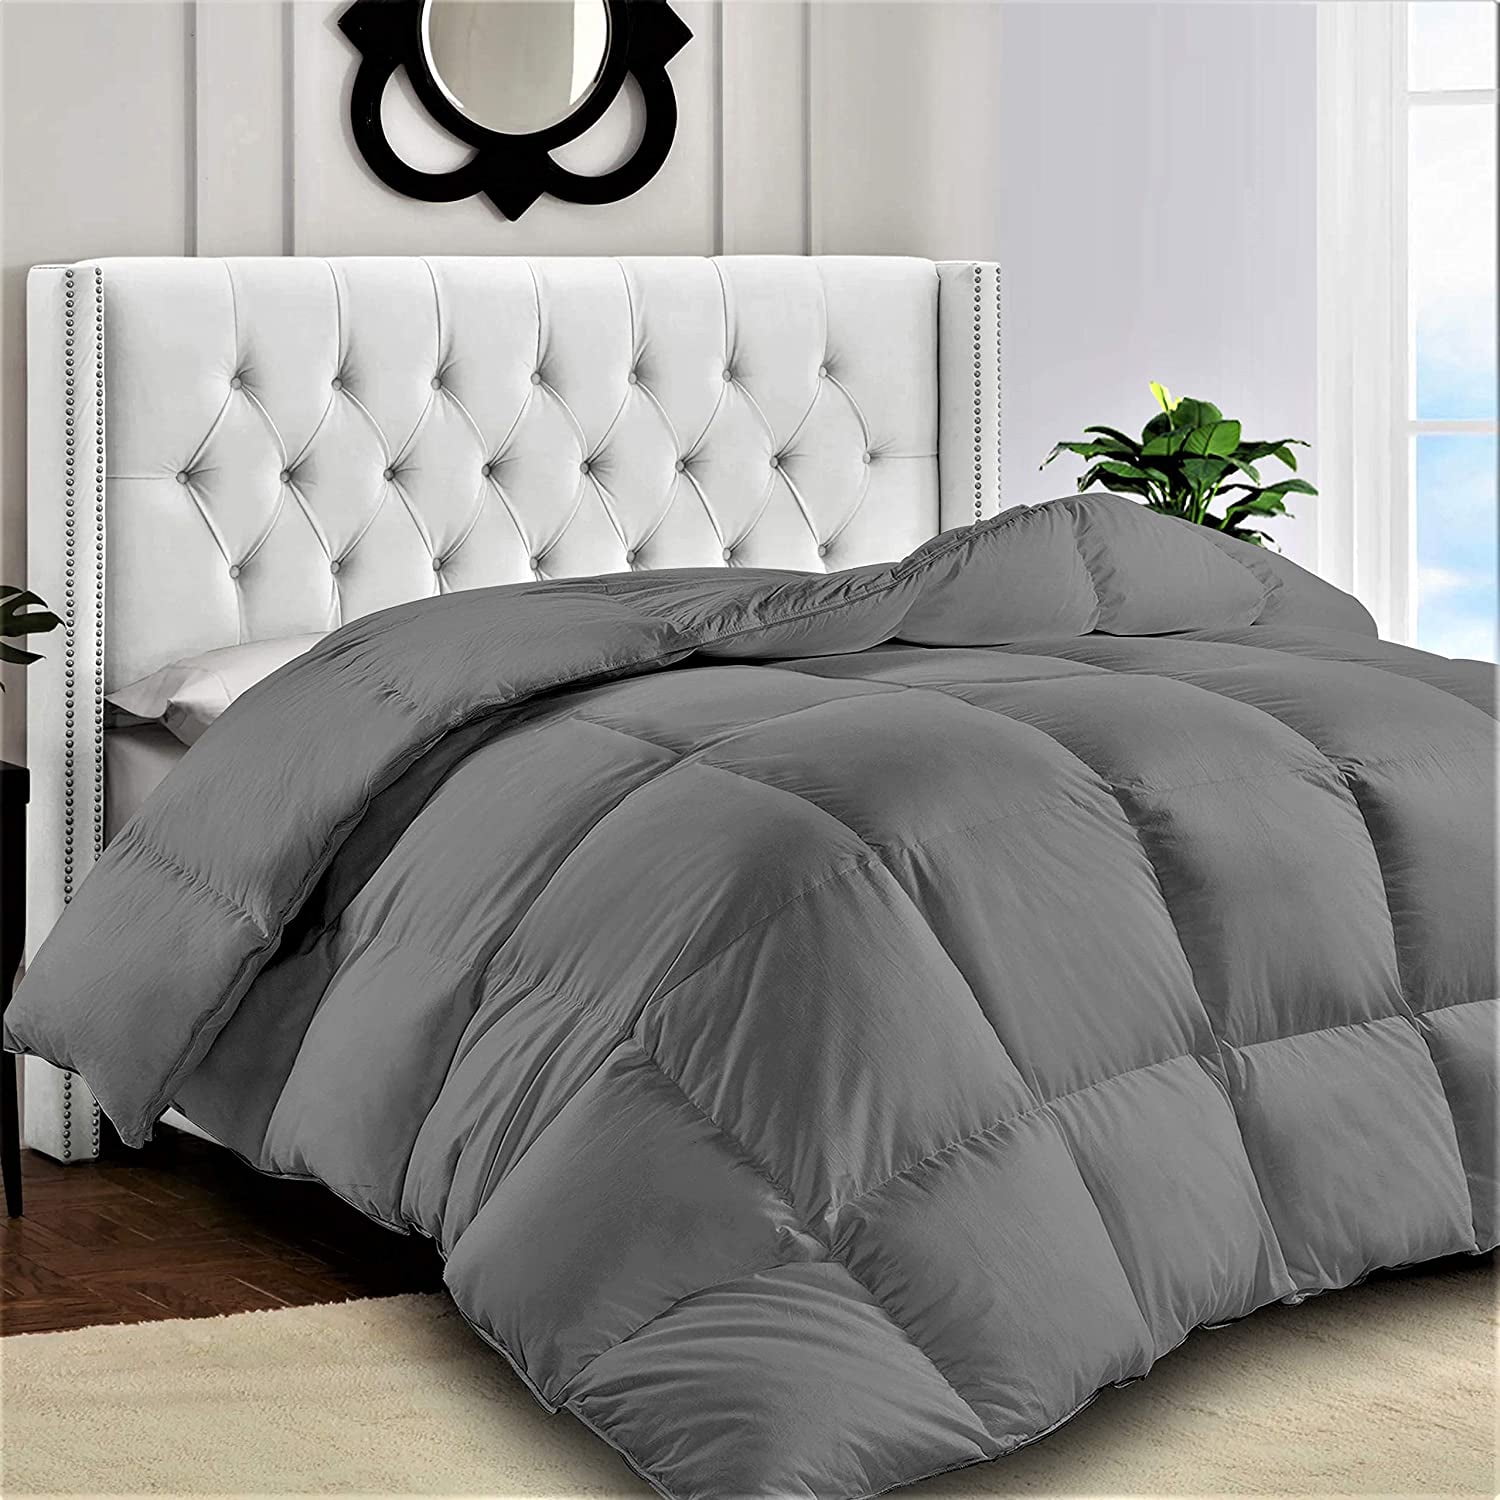 Details about   NEW ~ COZY ULTRA SOFT PLUSH LUX IVORY WHITE FAUX FUR  LUXURY CHIC COMFORTER SET 